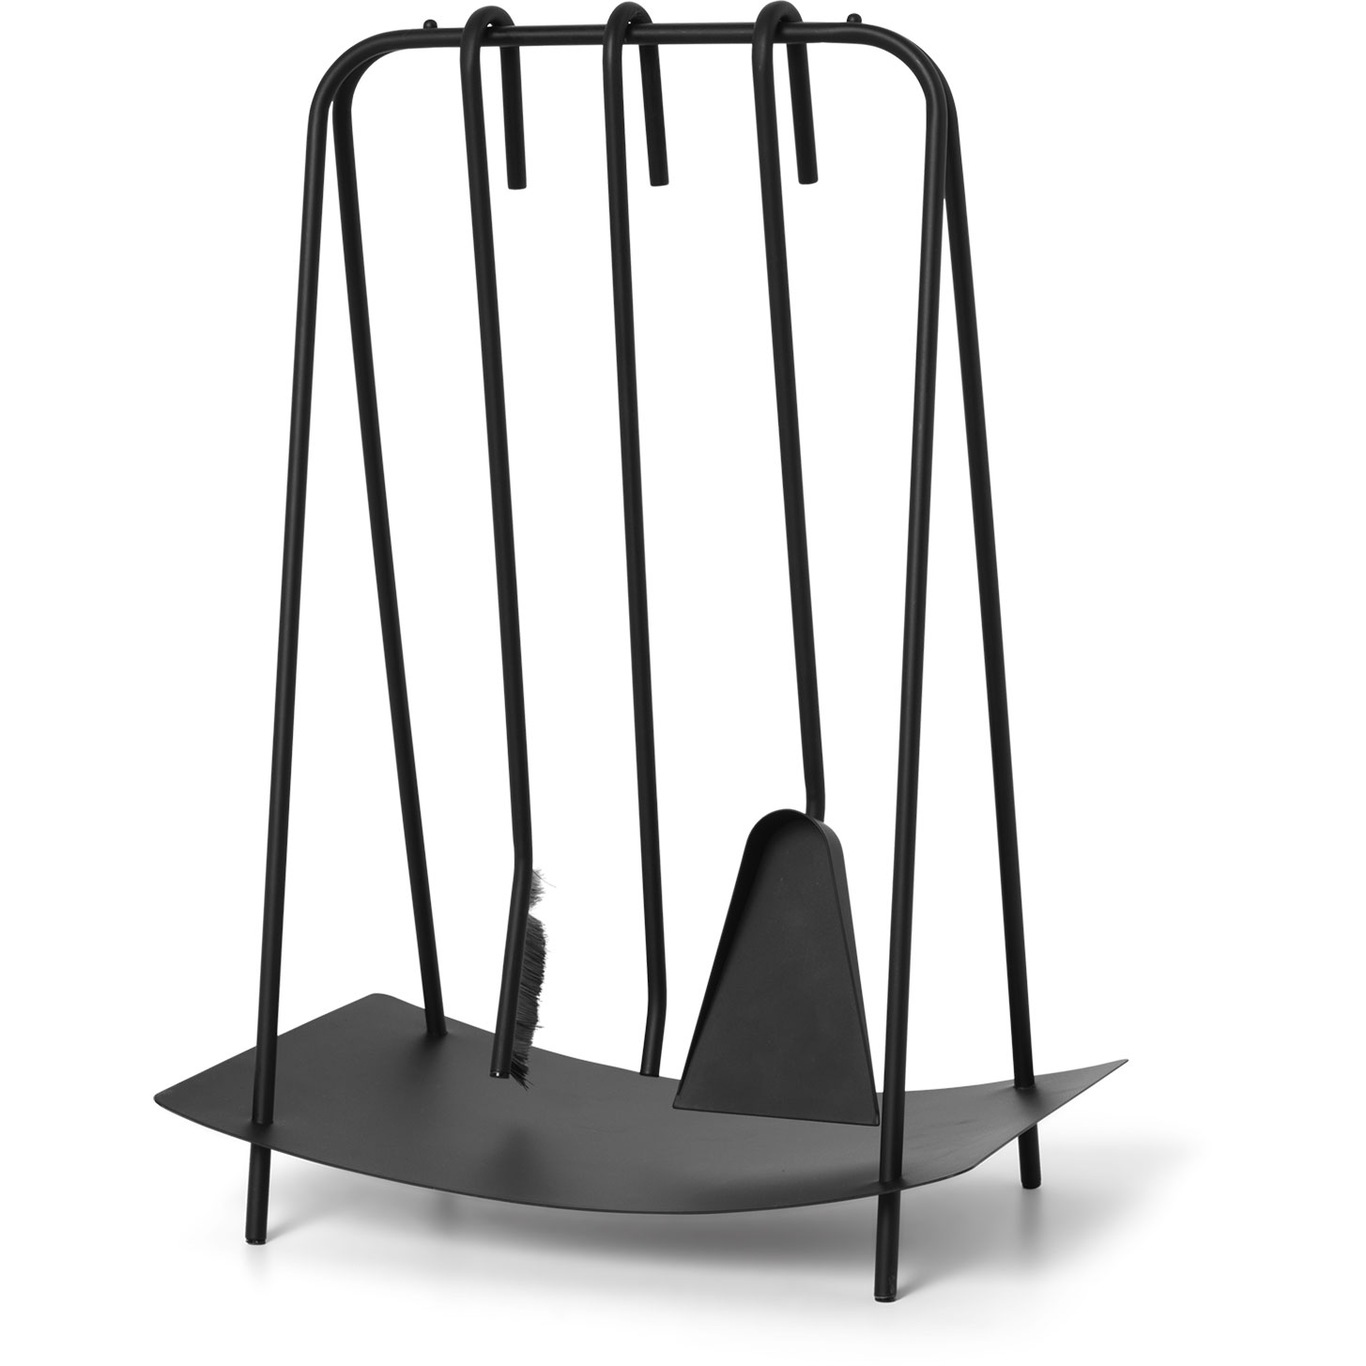 Port Fireplace Tools With Stand 3 Pieces, Black